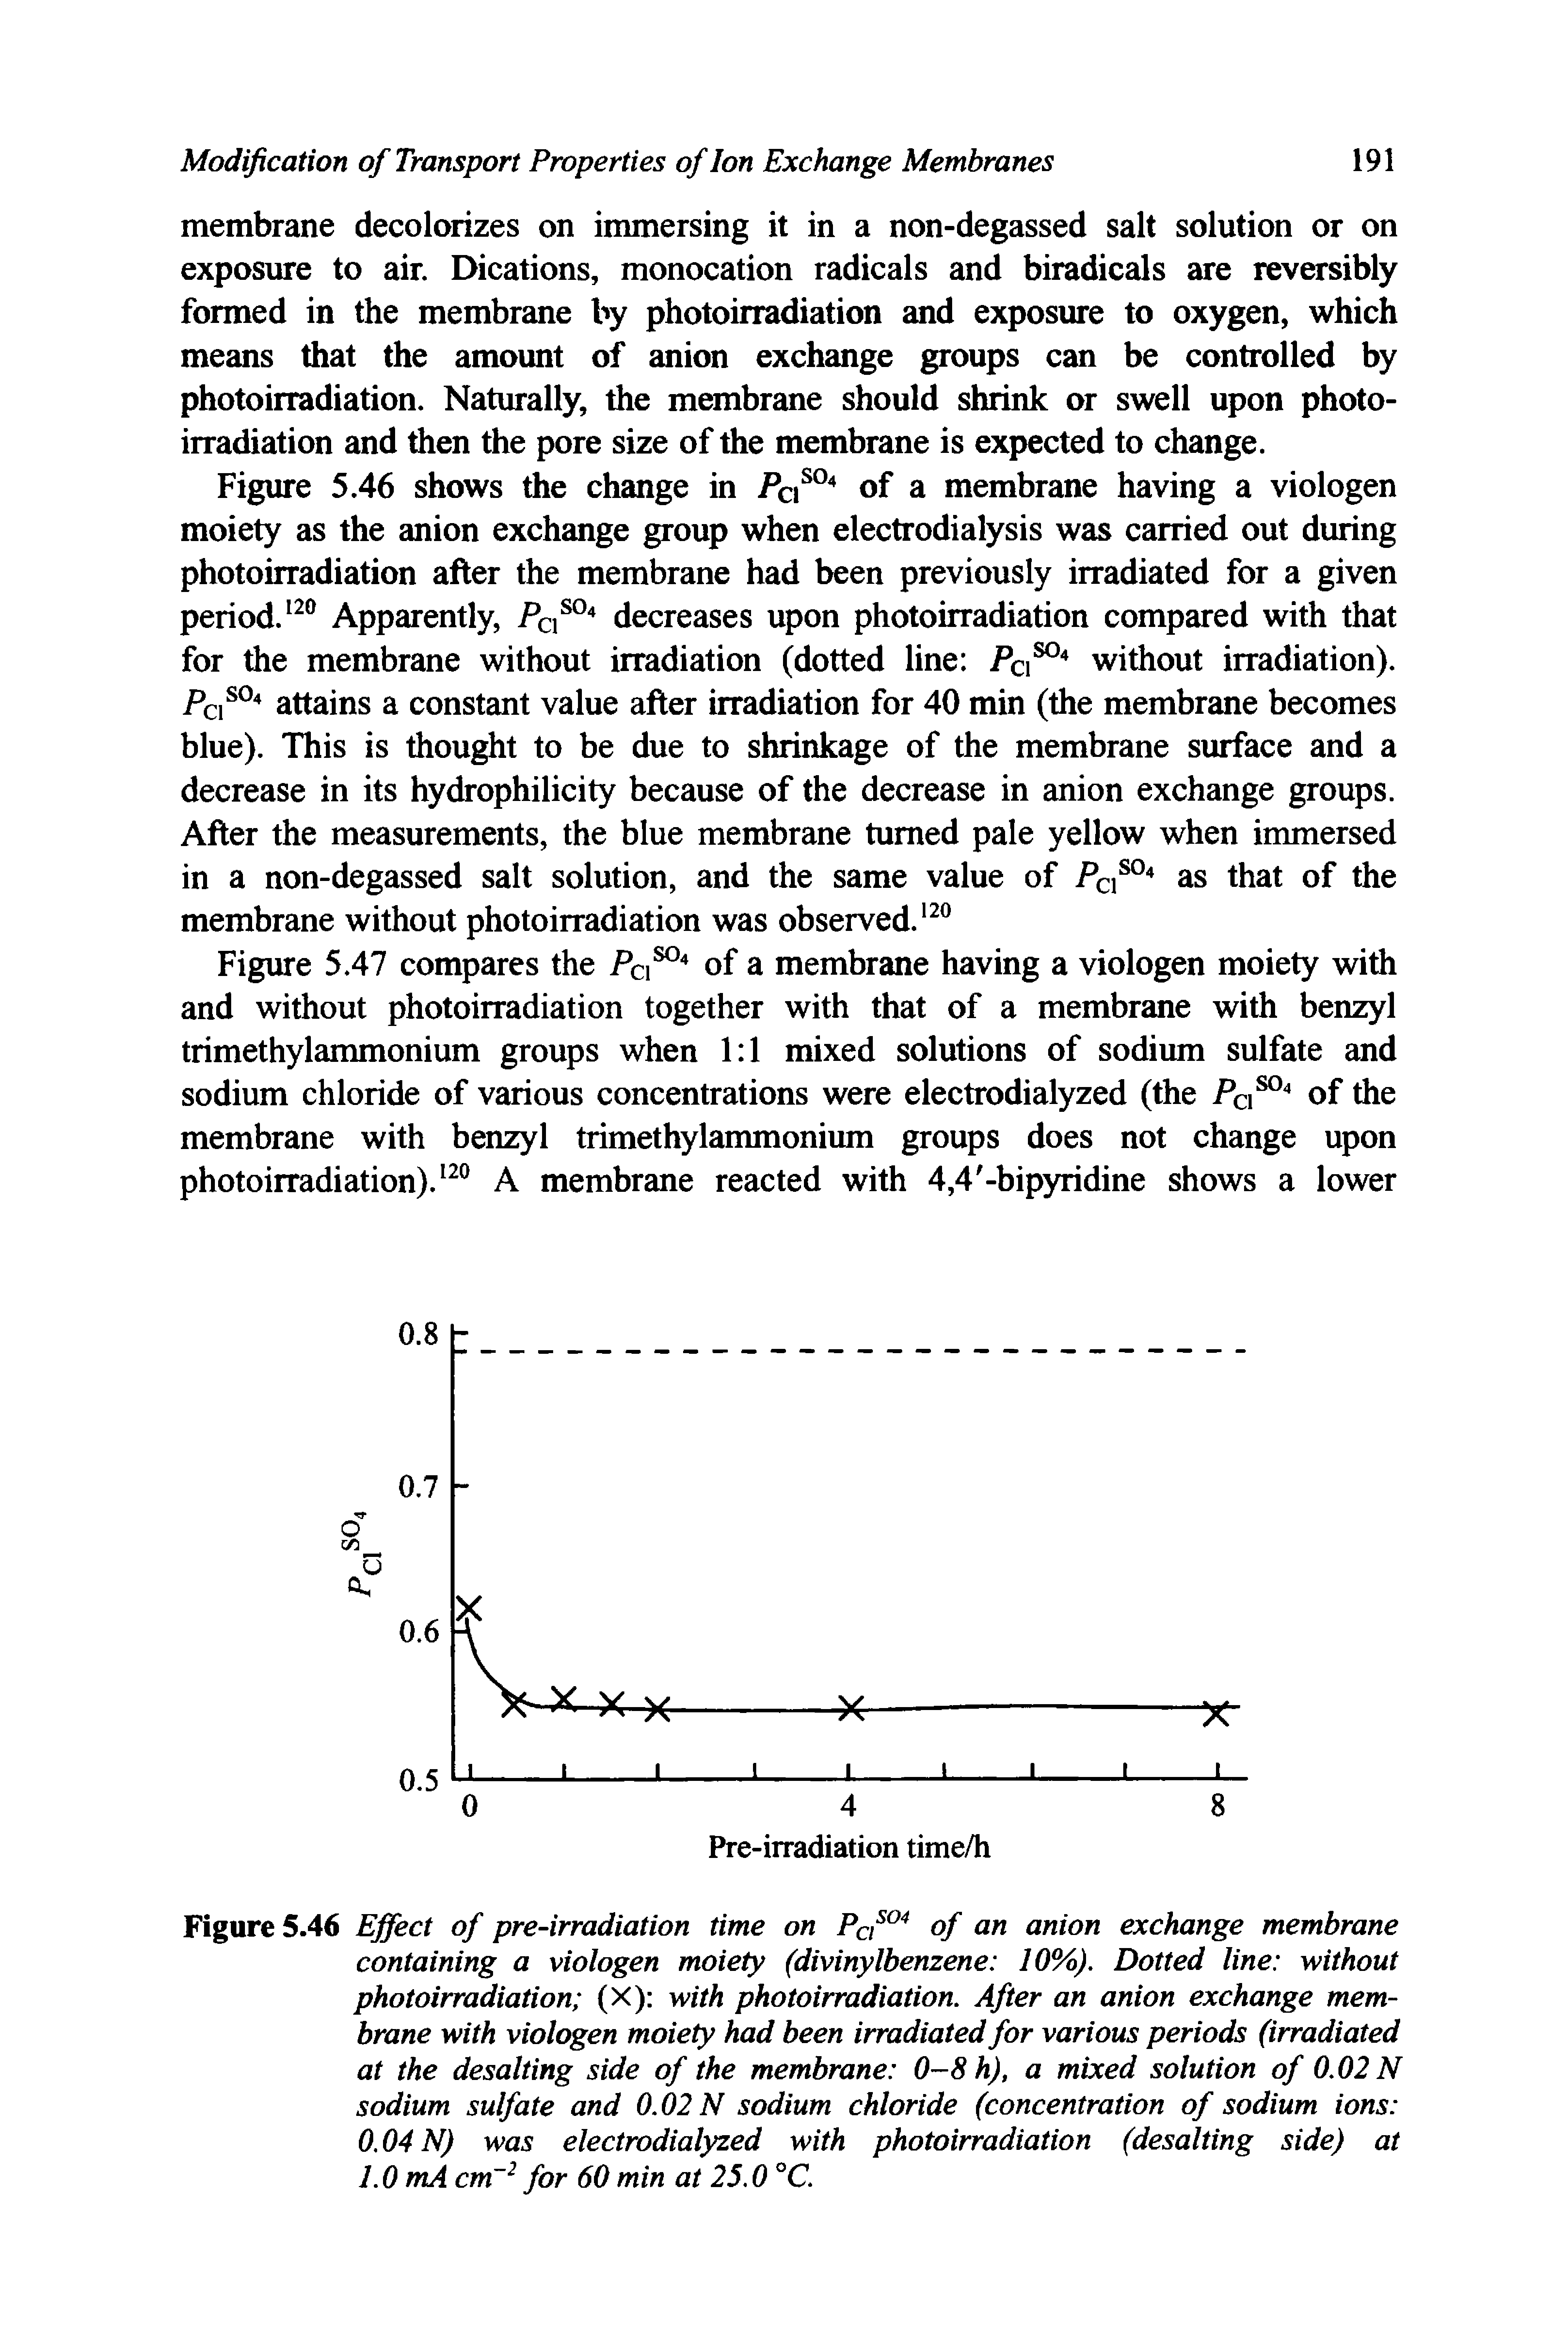 Figure 5.46 Effect of pre-irradiation time on Pas°4 of an anion exchange membrane containing a viologen moiety (divinylbenzene 10%). Dotted line without photoirradiation (X) with photoirradiation. After an anion exchange membrane with viologen moiety had been irradiated for various periods (irradiated at the desalting side of the membrane 0—8h), a mixed solution of 0.02 N sodium sulfate and 0.02 N sodium chloride (concentration of sodium ions 0.04 N) was electrodialyzed with photoirradiation (desalting side) at 1.0 mA cm 2 for 60 min at 25.0 °C.